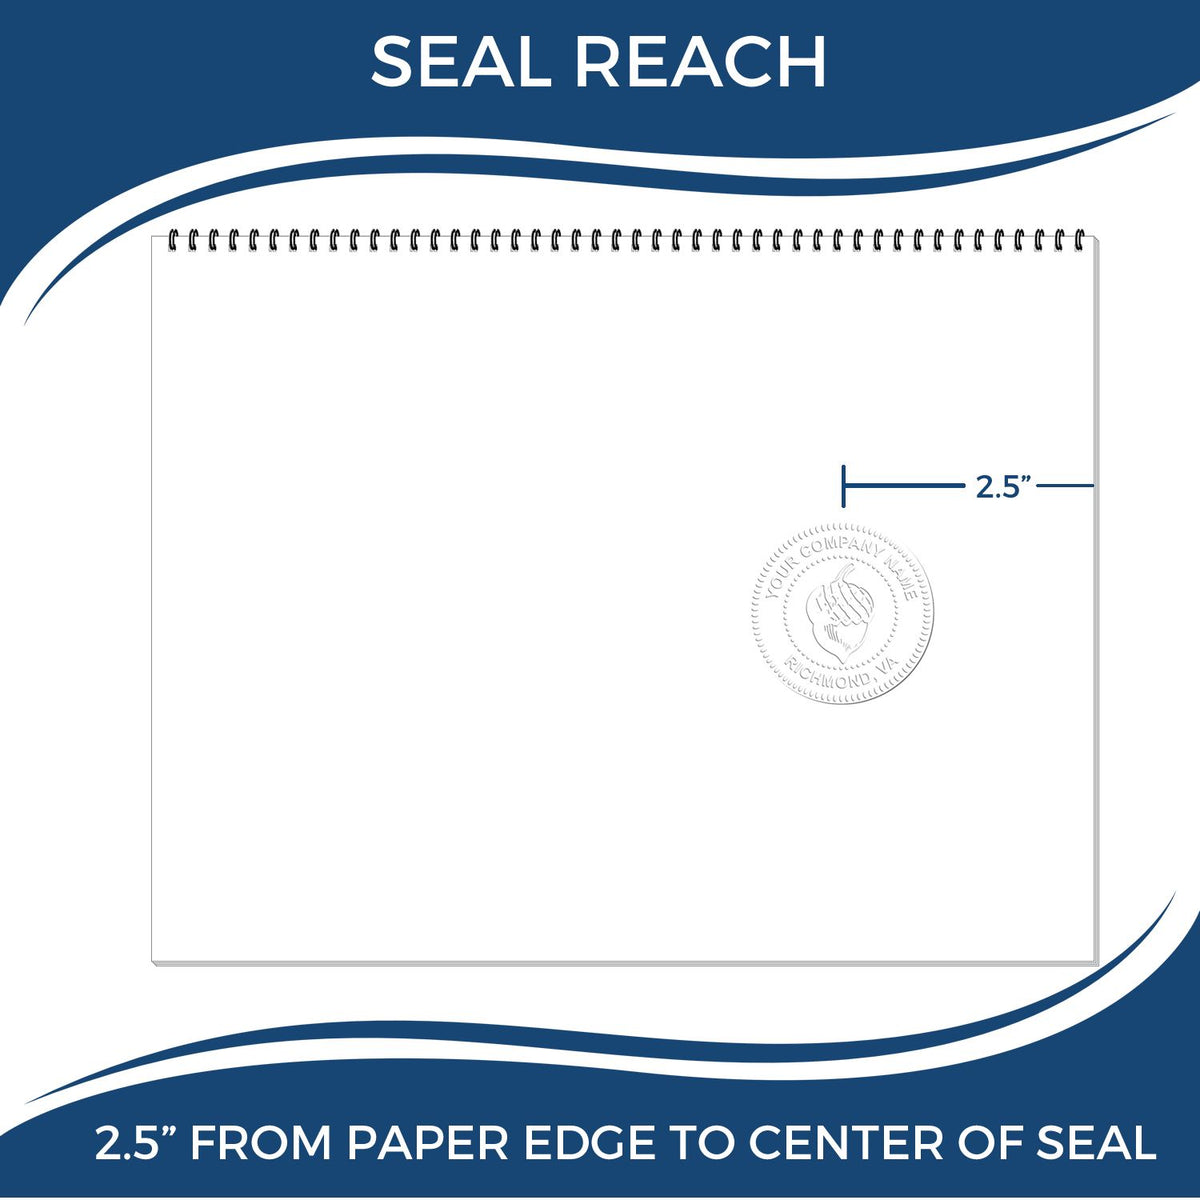 An infographic showing the seal reach which is represented by a ruler and a miniature seal image of the Heavy Duty Cast Iron Louisiana Land Surveyor Seal Embosser